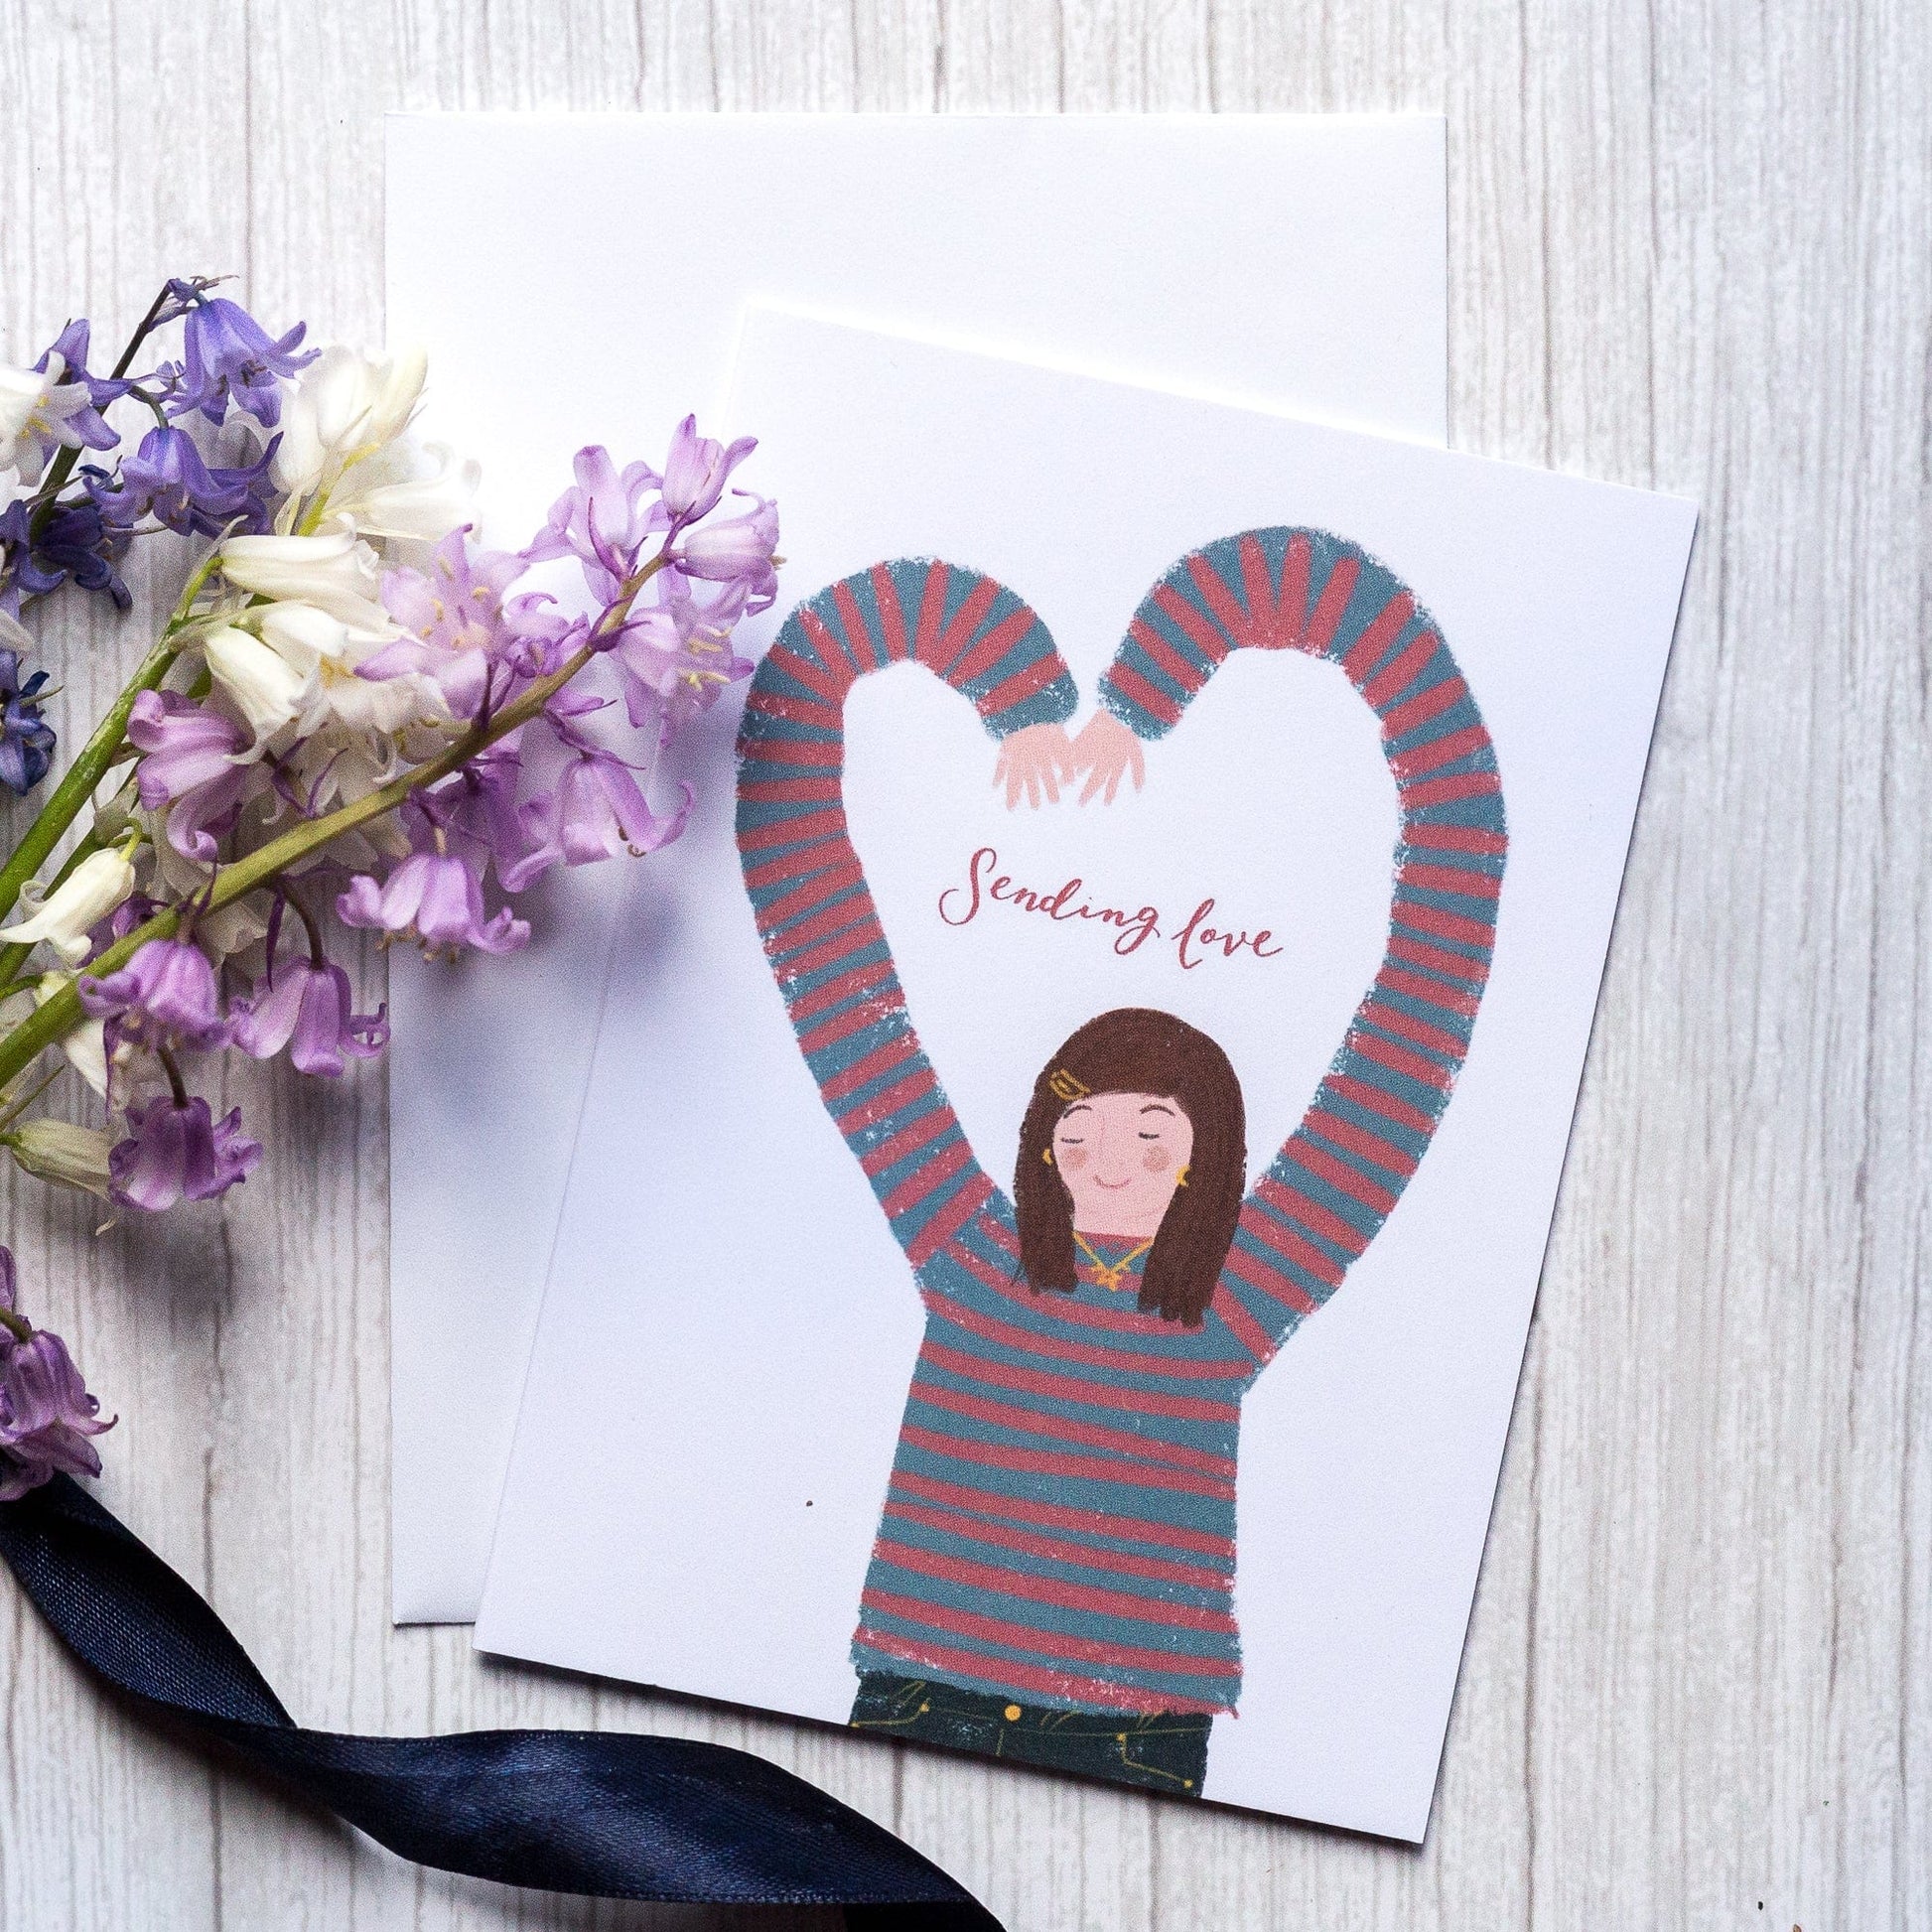 Sending love illustrated card And Hope Designs Greeting & Note Cards